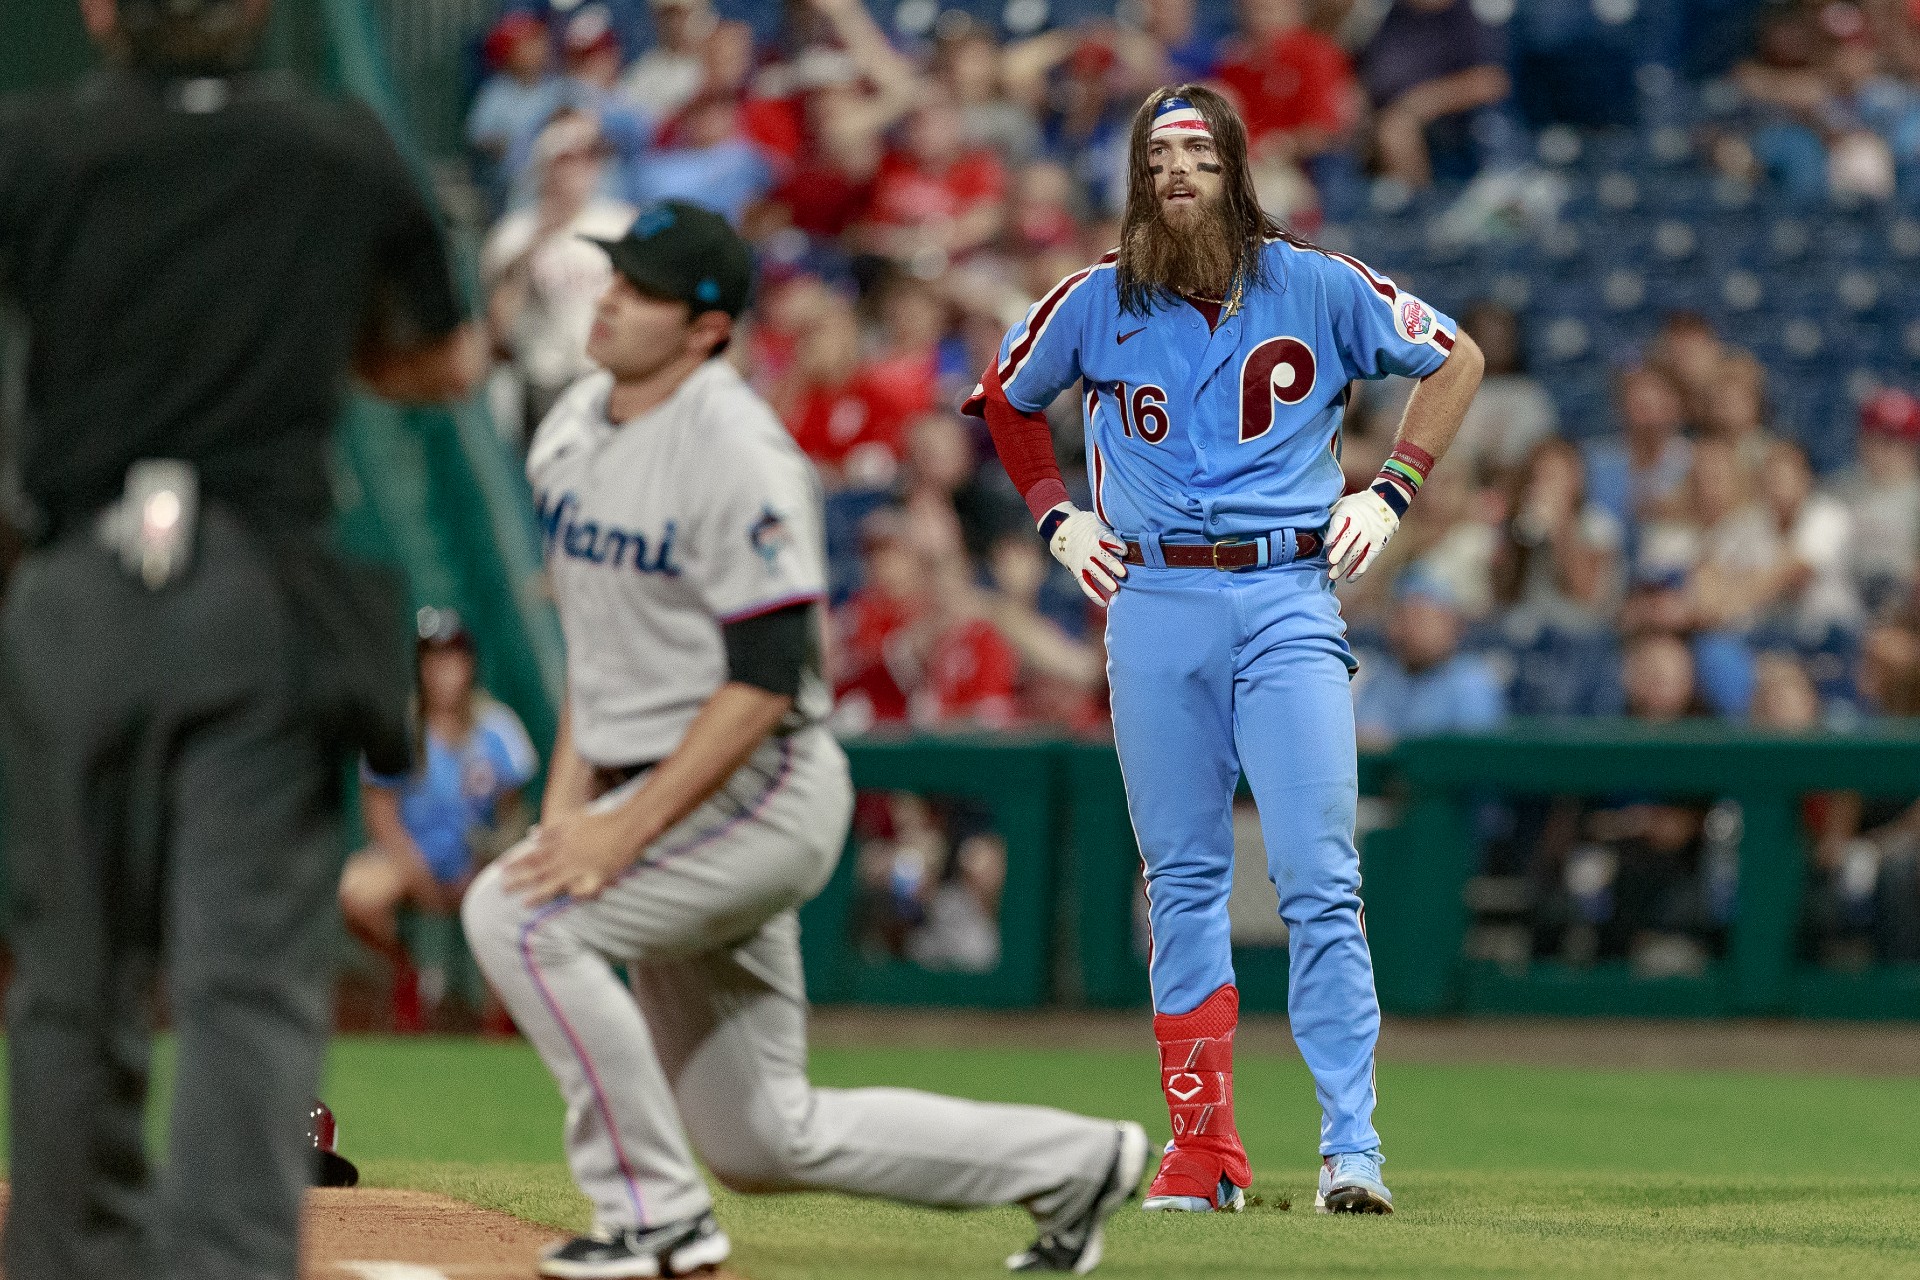 Slow start to September continues as Phillies drop 3 of 4 to